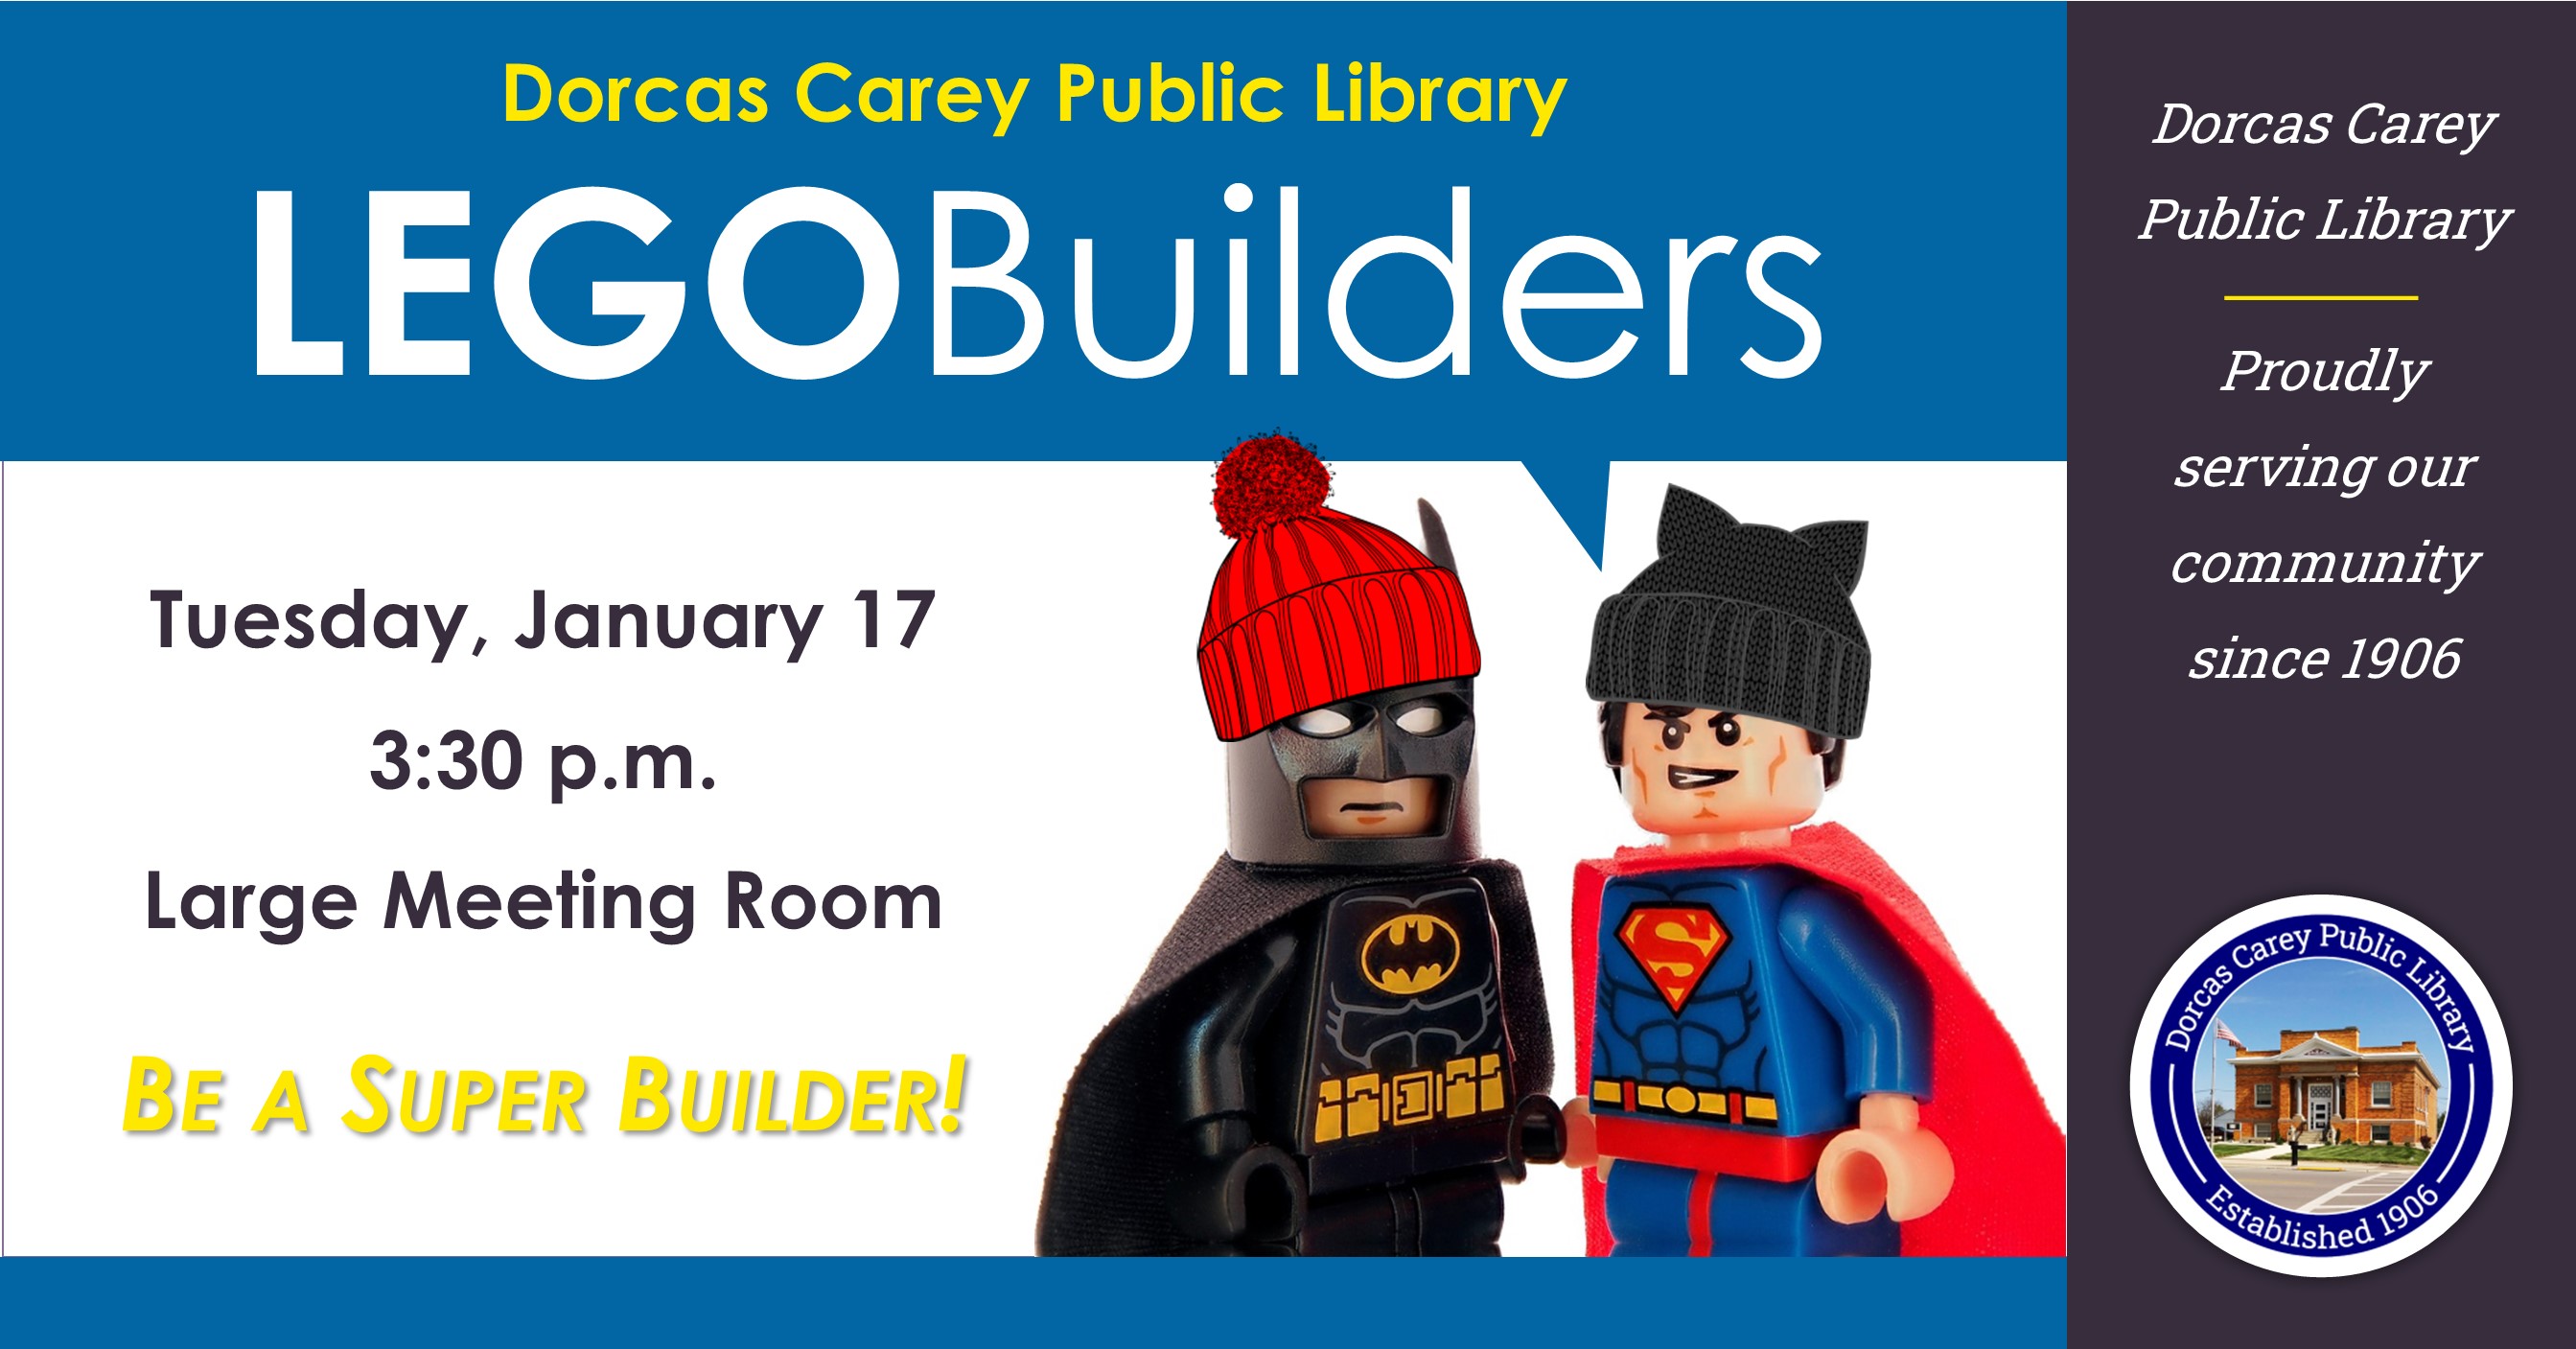 Do you love LEGOs?  Our Lego Builders program is back! Patrons of all ages can go wild building on the 3rd Tuesday of every month at 3:30 p.m., September through May.